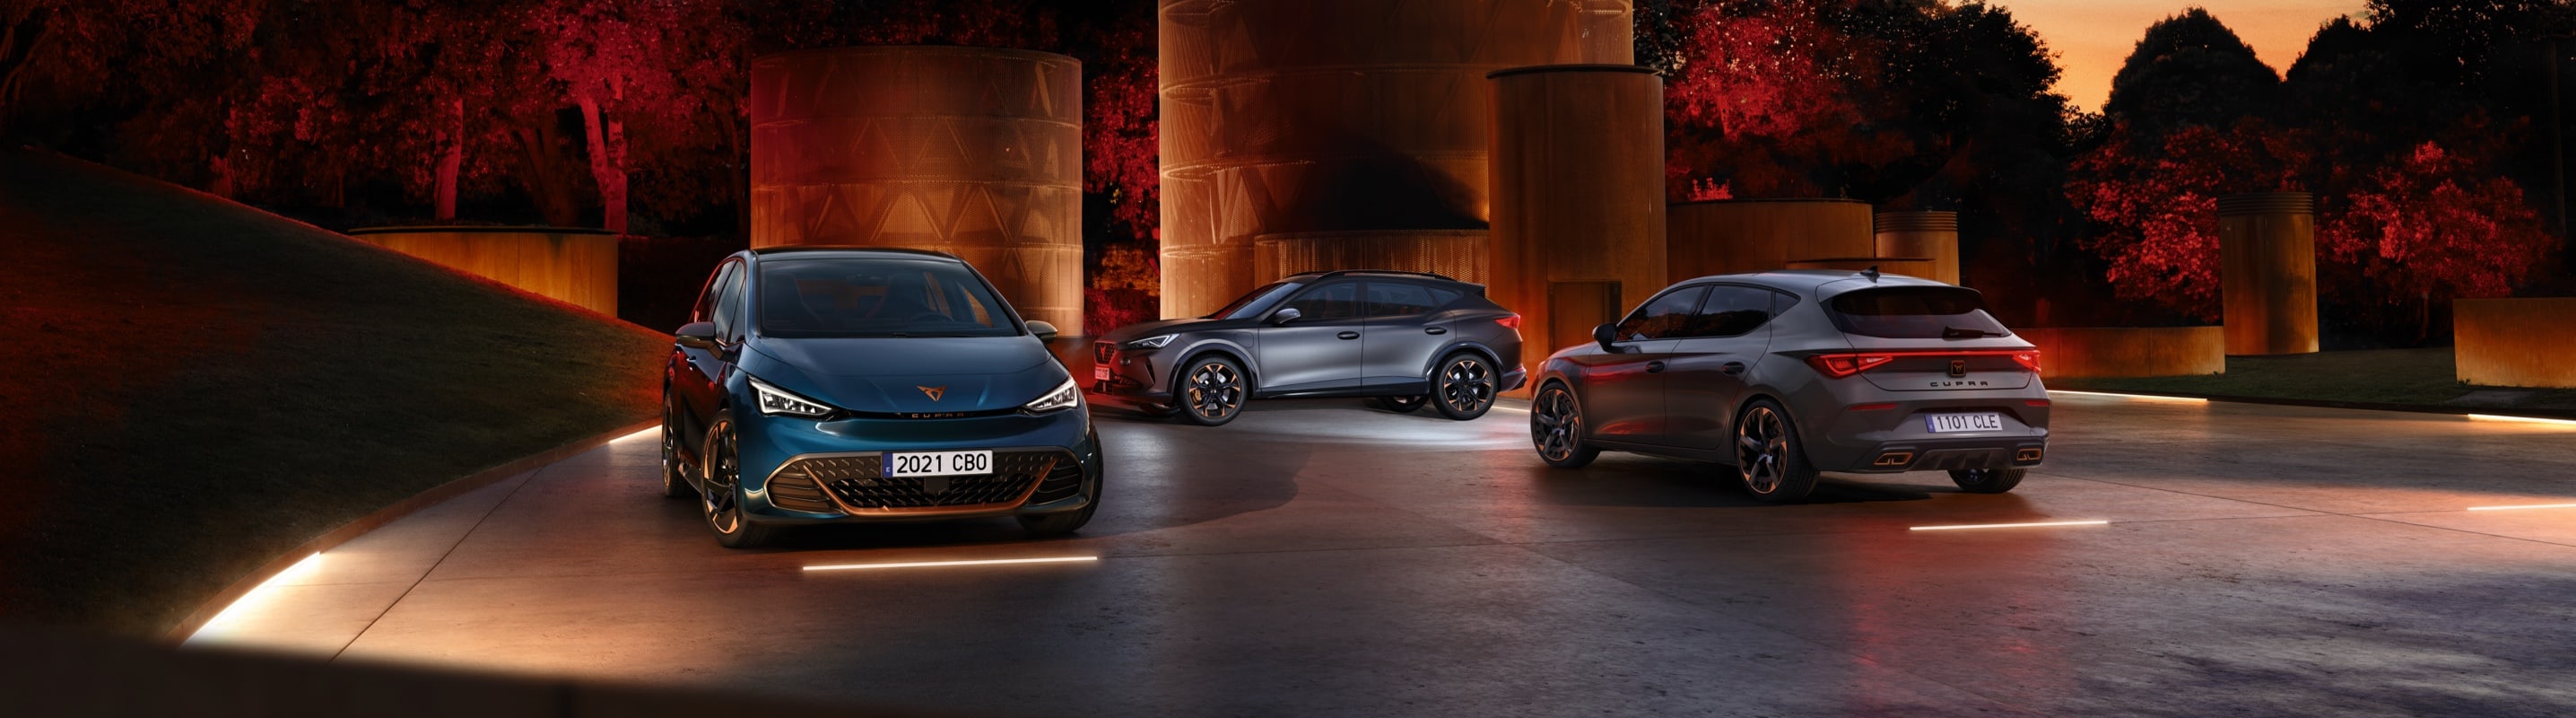 cupra-formentor-2020-magnetic-tech-grey-with-copper-alloy-wheels